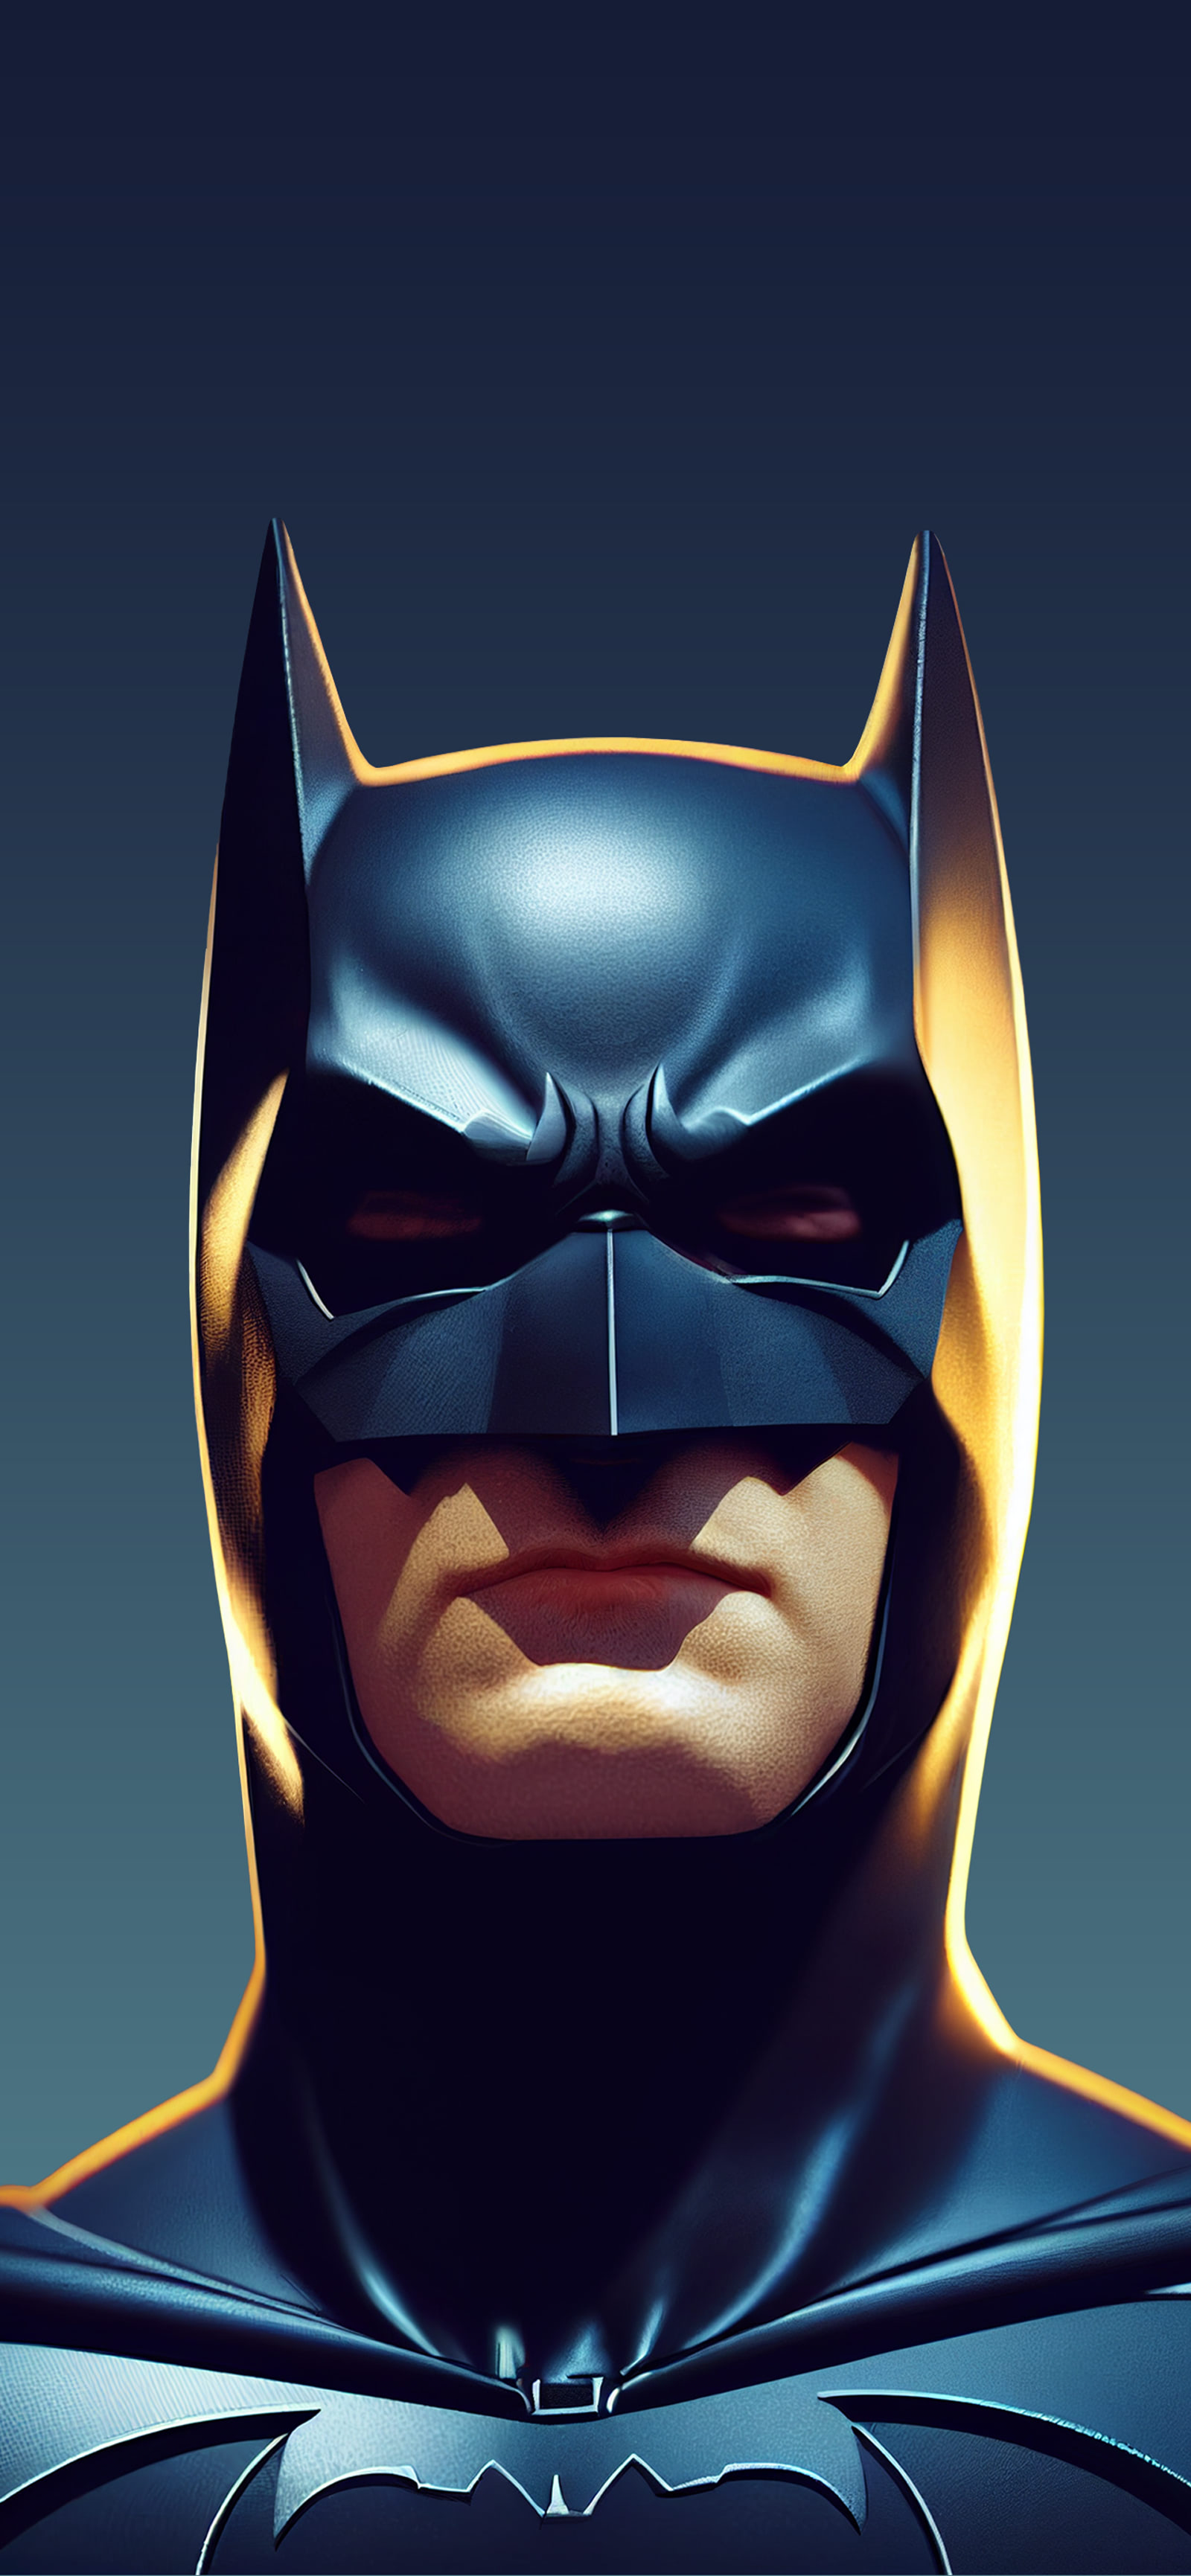 Wallpaper Wednesday Batman Wallpapers for iPhone and iPad